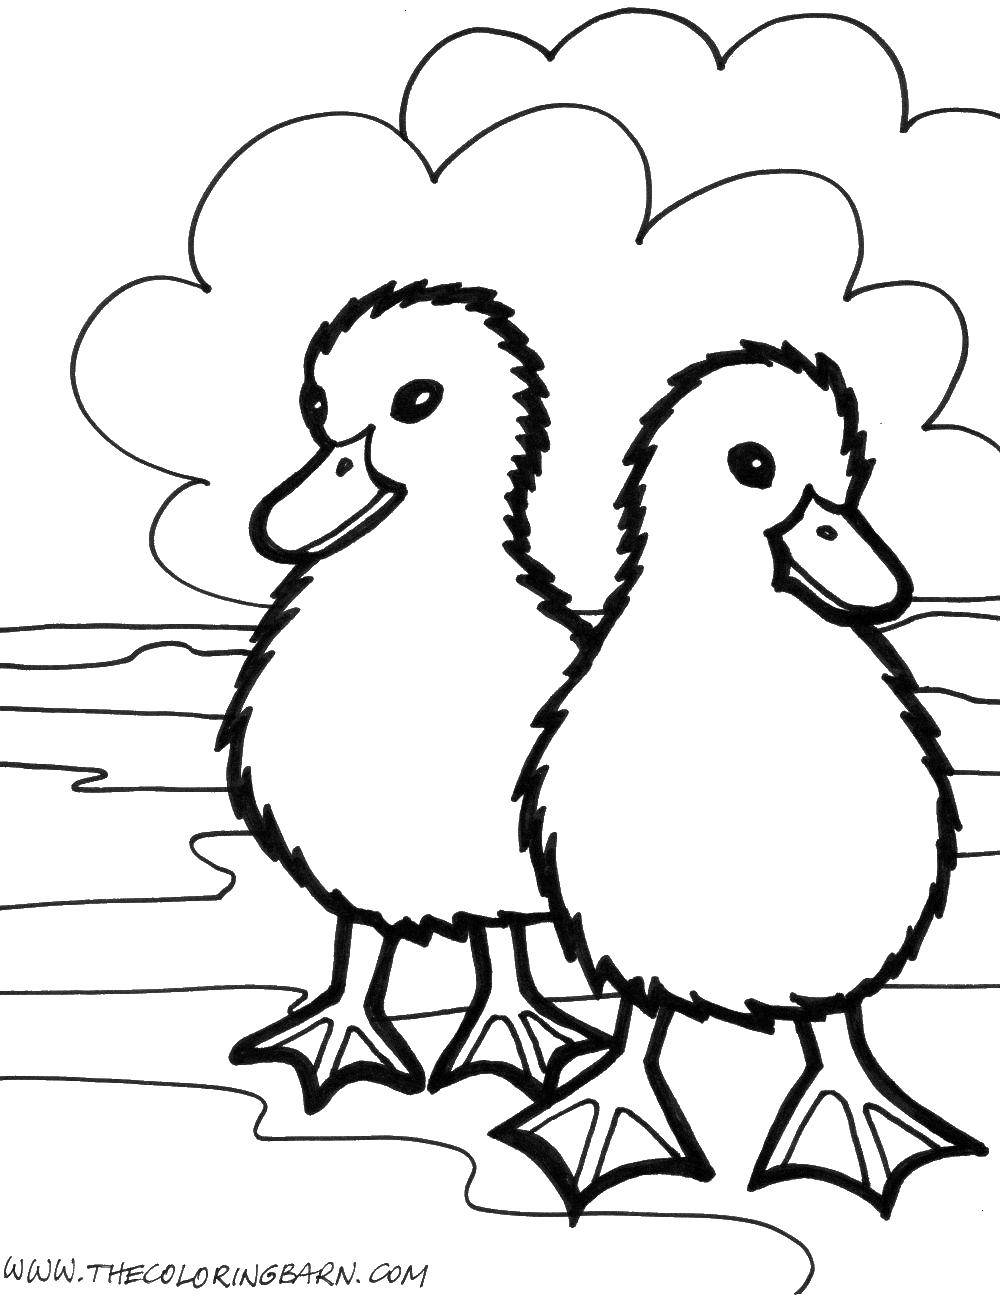 Coloring Two duckling. Category birds. Tags:  ducks, clouds.